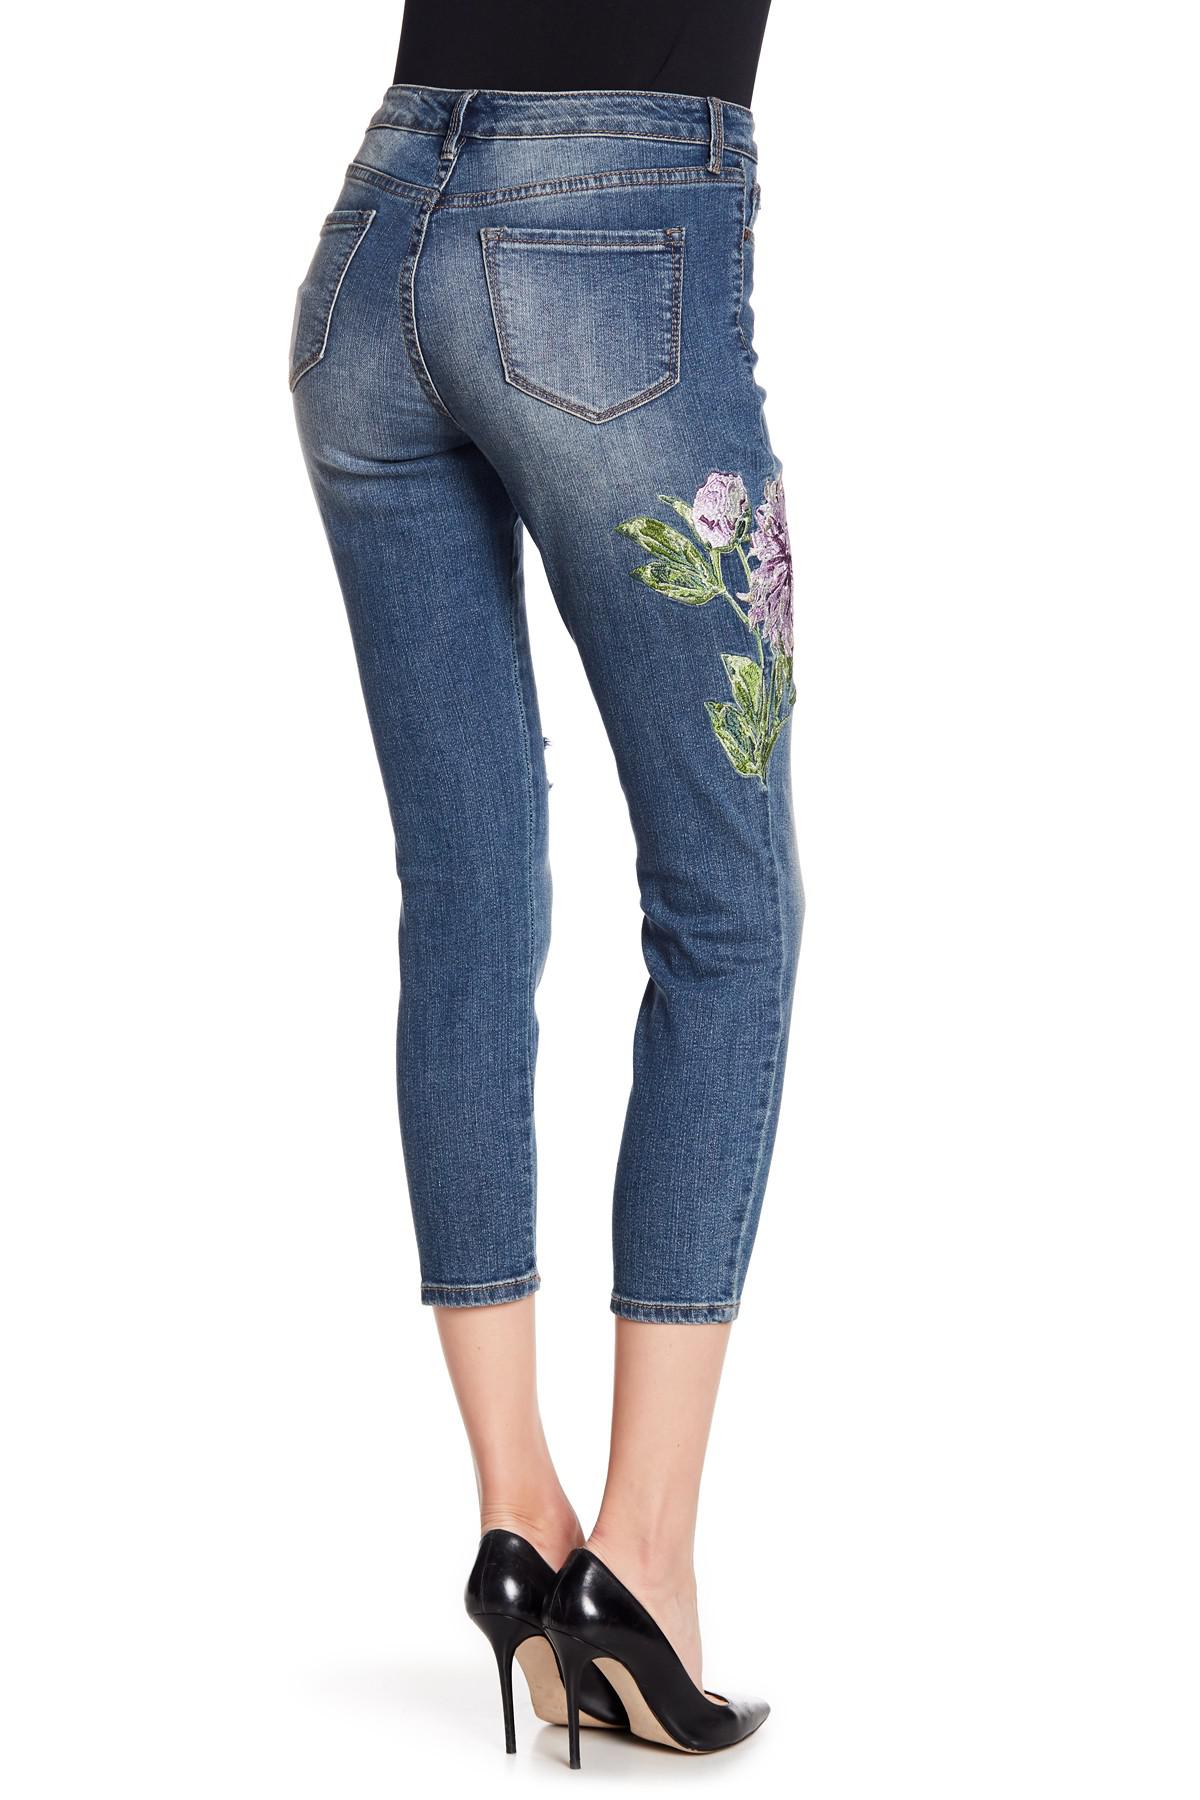 Nine West Gramercy Floral Embroidered Skinny Jeans in Blue | Lyst